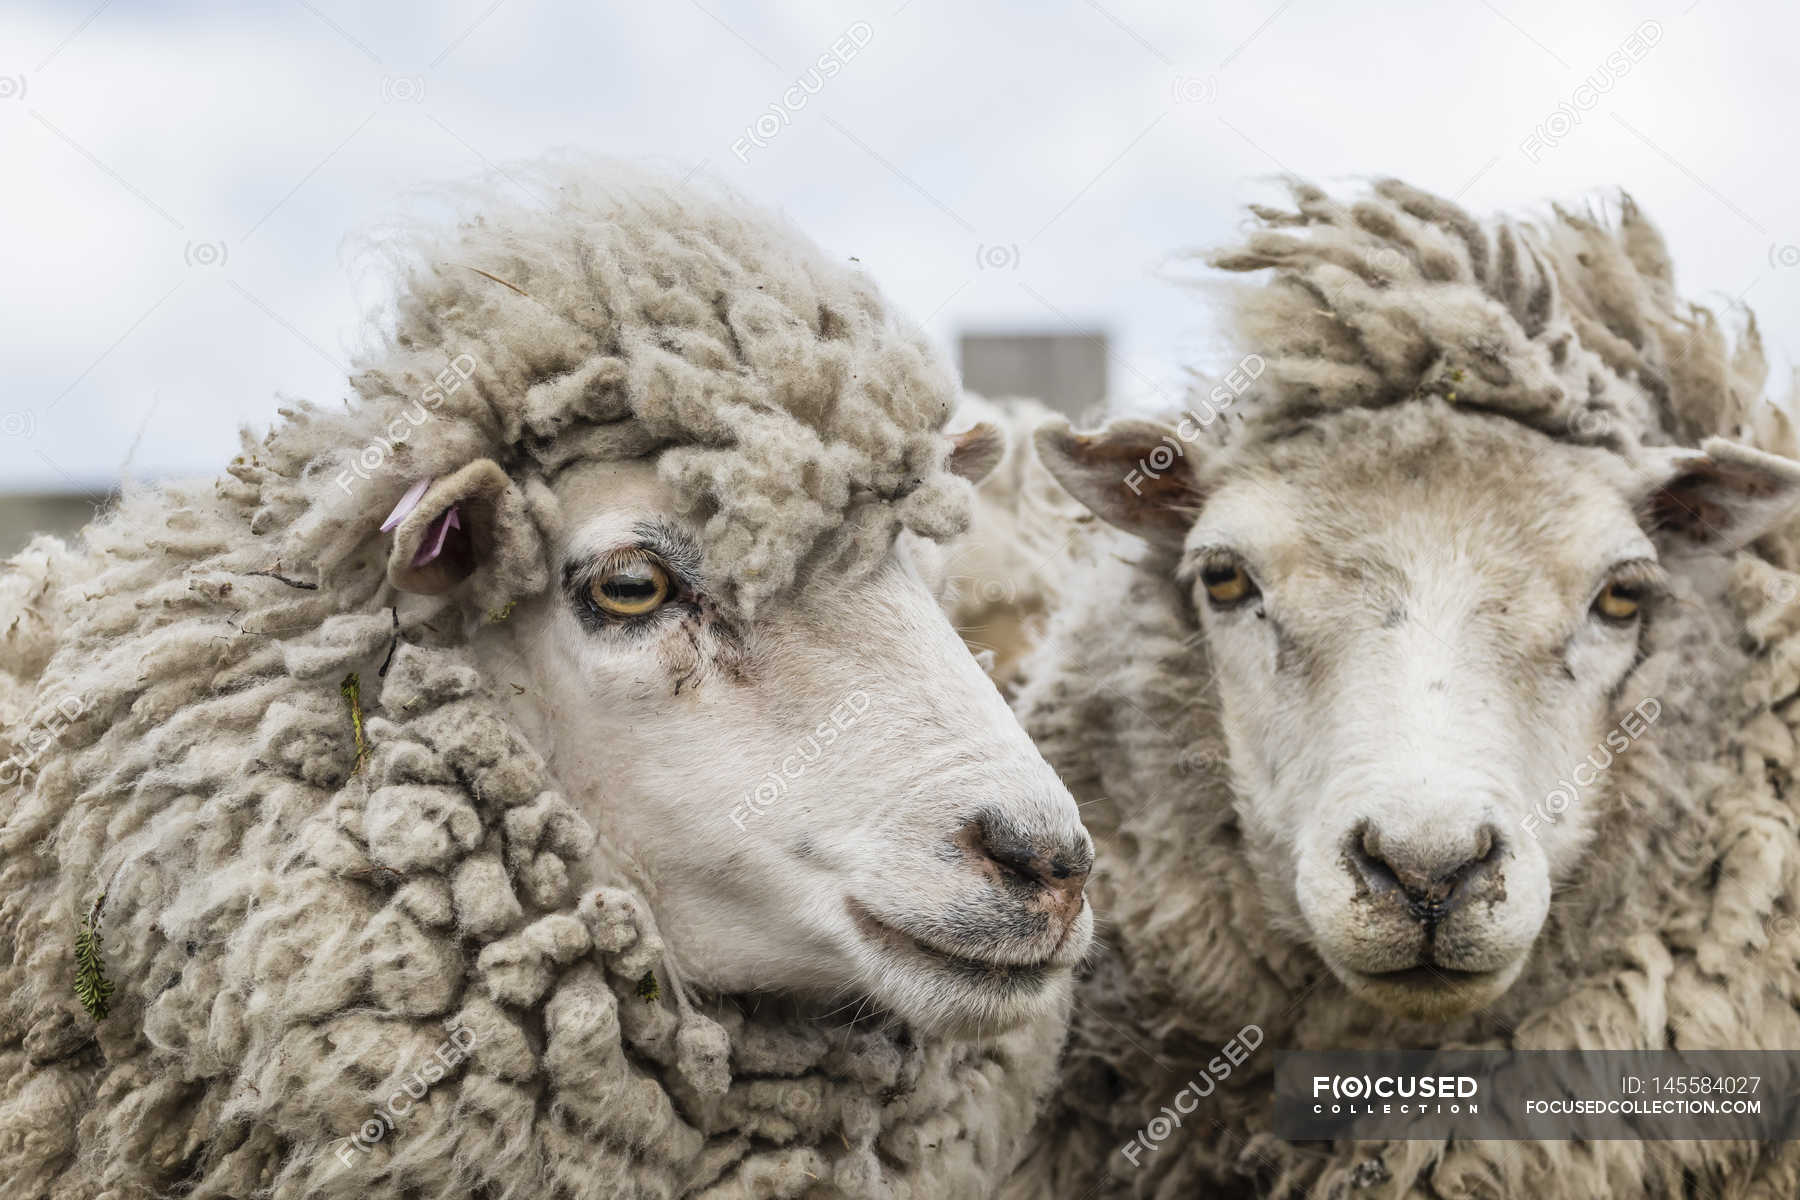 Two sheep at wind — Stock Photo | #145584027